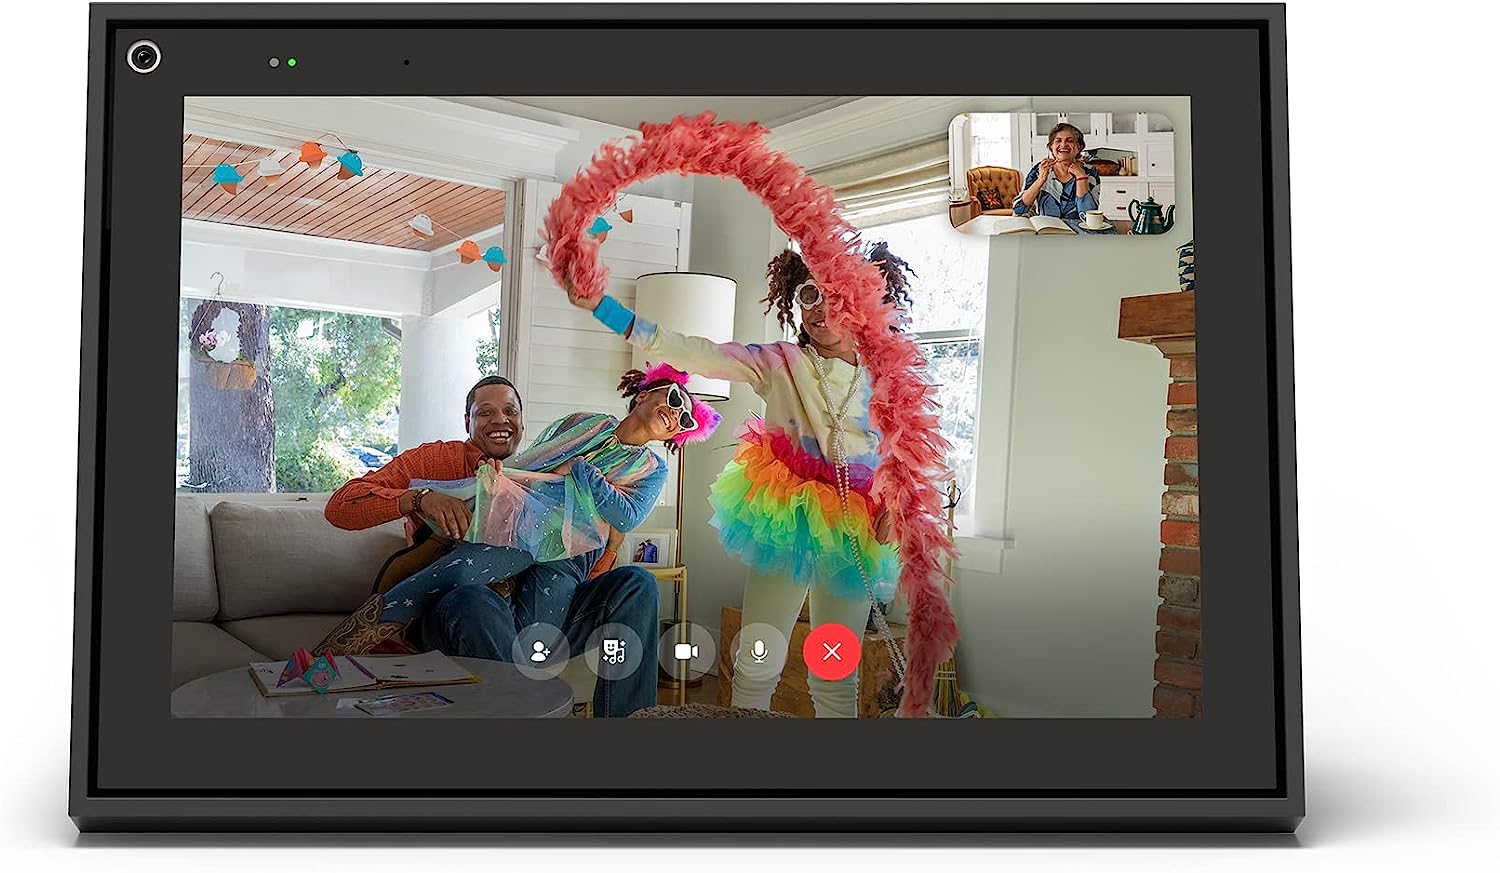 Meta Portal - Smart Video Calling for the Home with 10” Touch Screen Display - Black